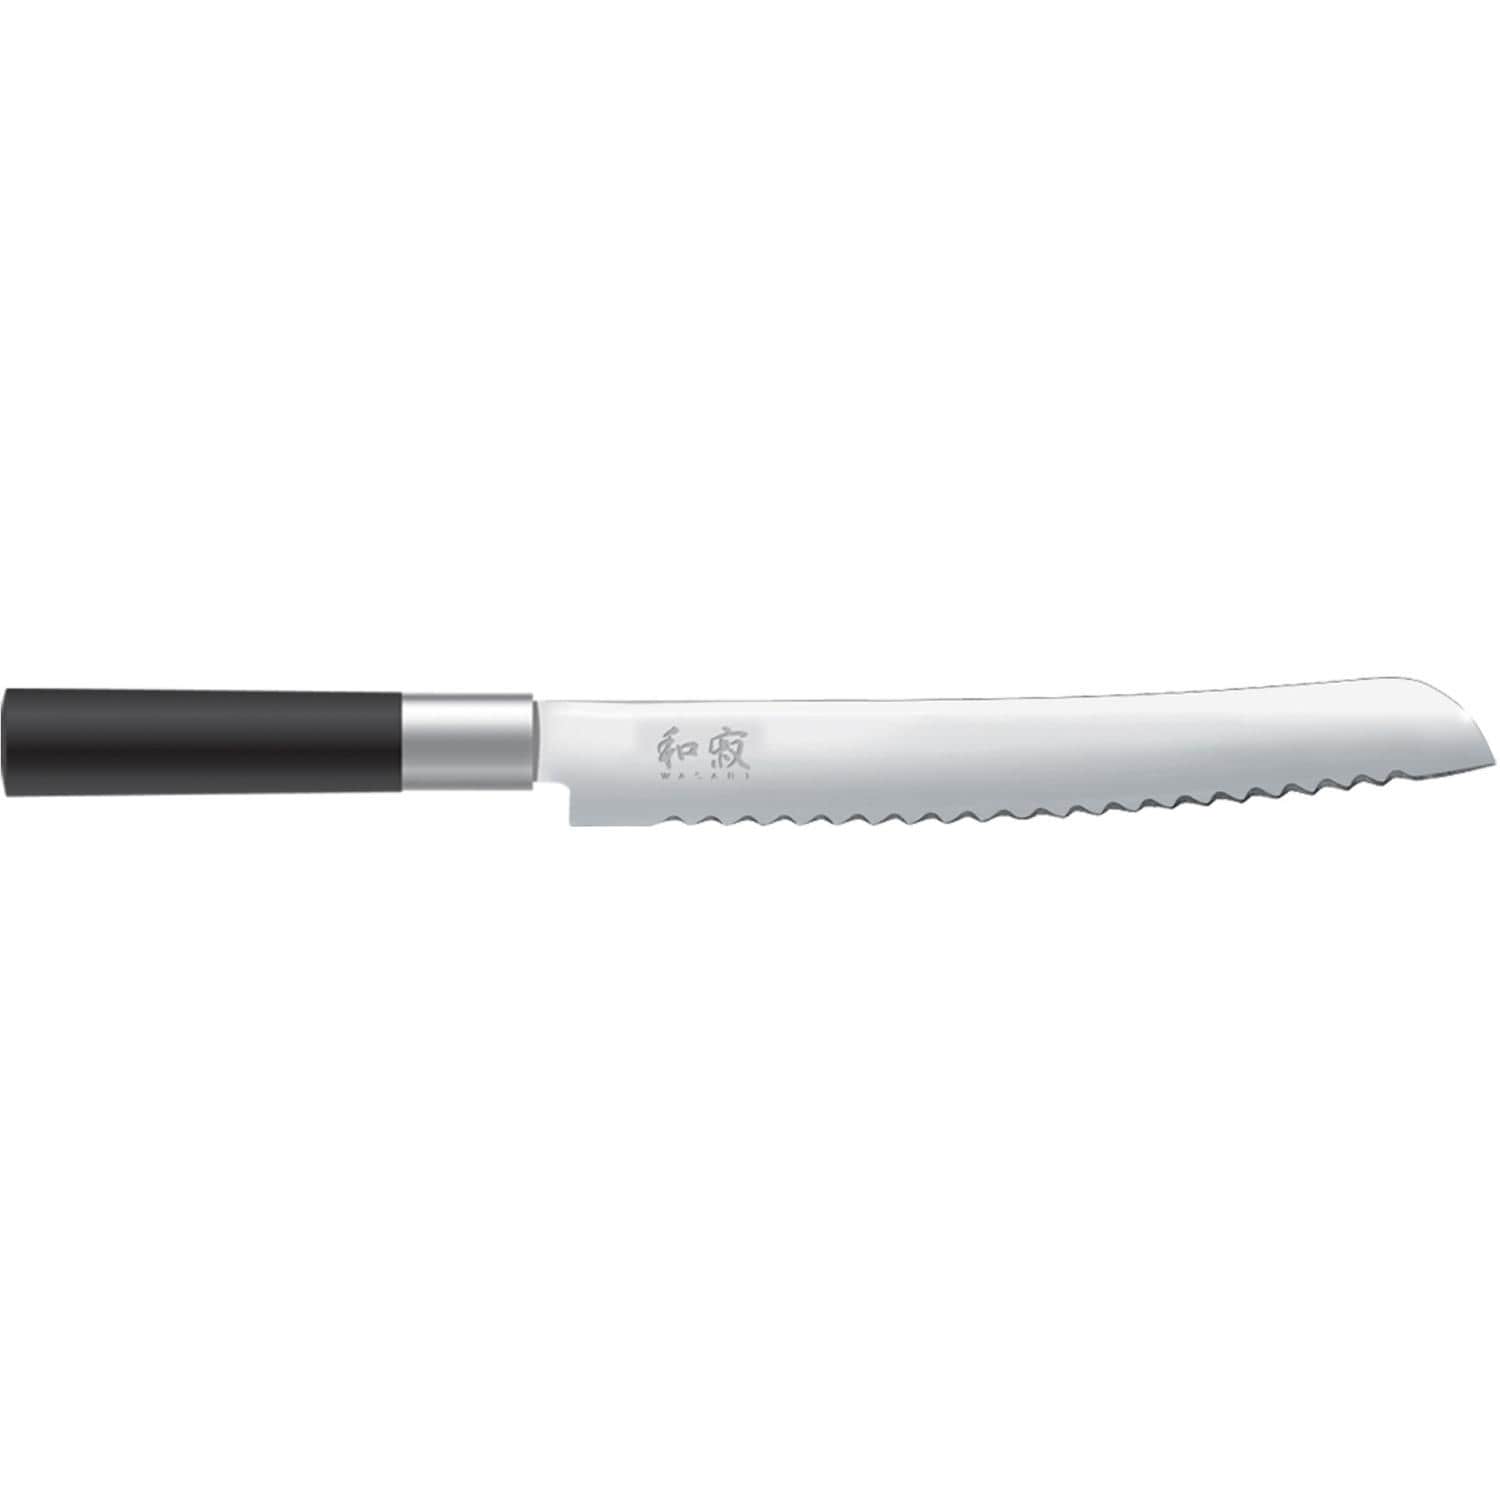 https://ak1.ostkcdn.com/images/products/is/images/direct/9e958961538040c53b70d3be3c5a7f58ae6d0c1c/Kai-6723B-Wasabi-Black-Bread-Knife%2C-9-Inch.jpg